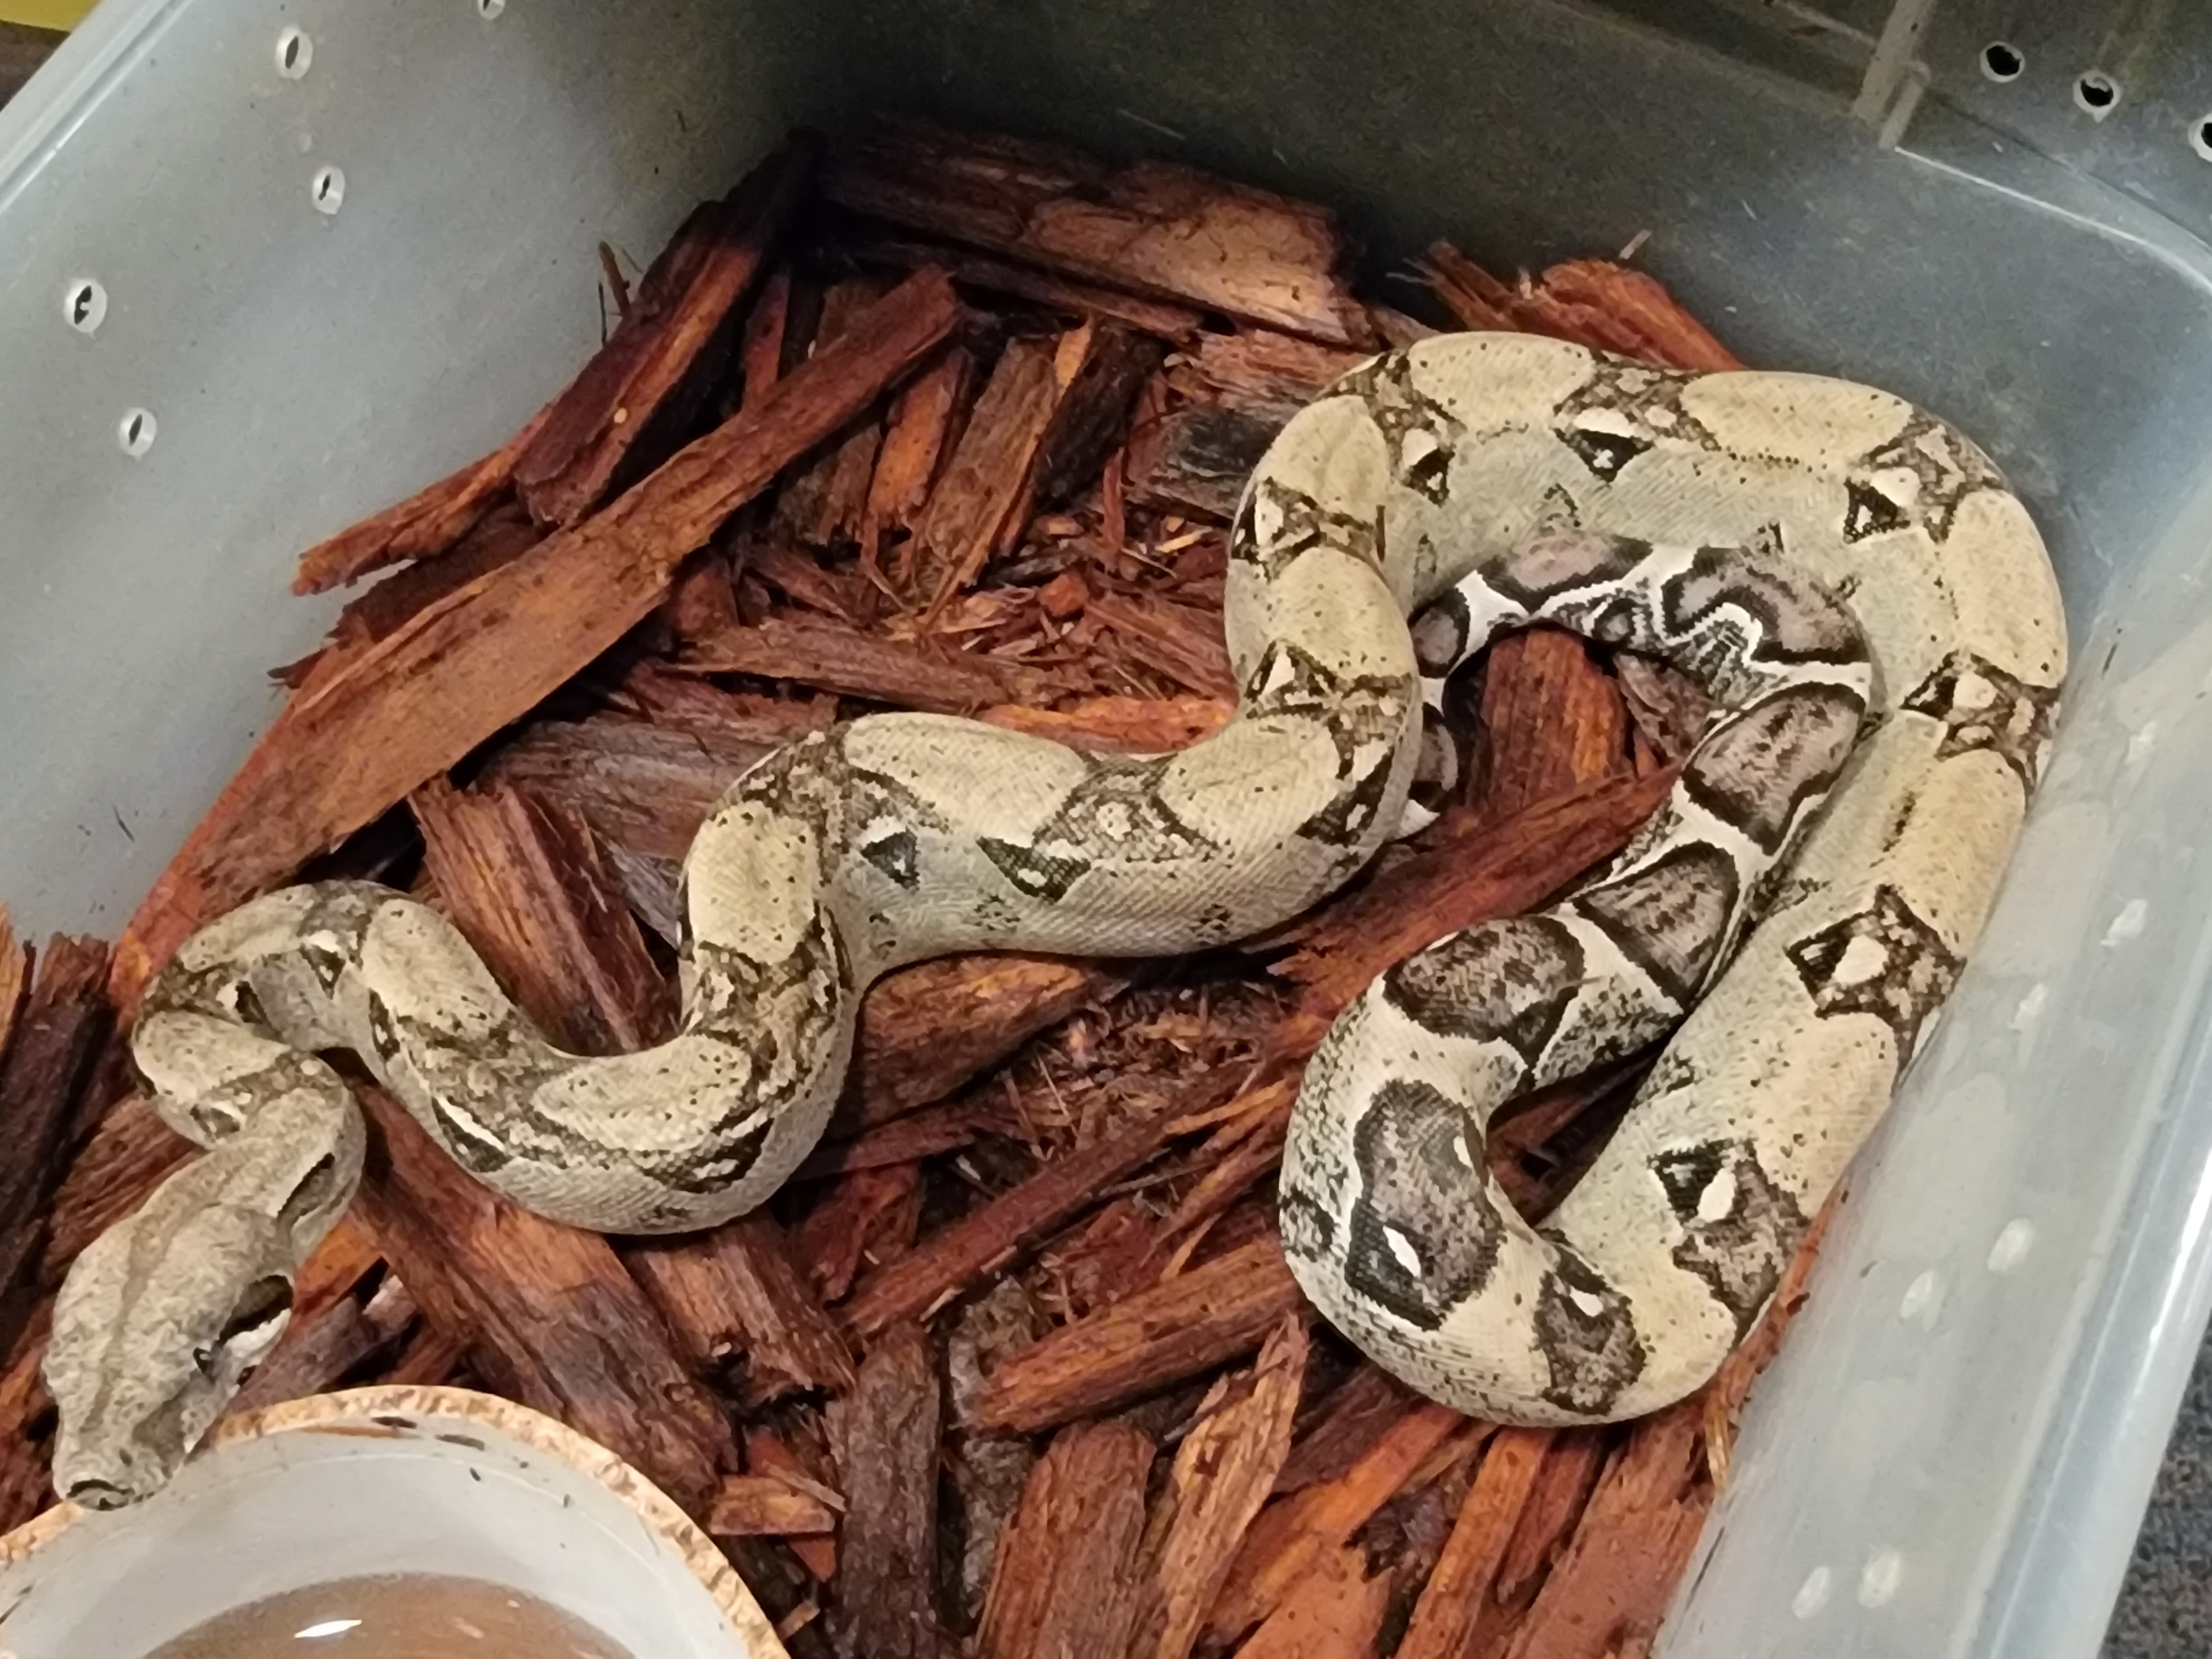 Anery Boa Constrictor by Extraordinary Ectotherms